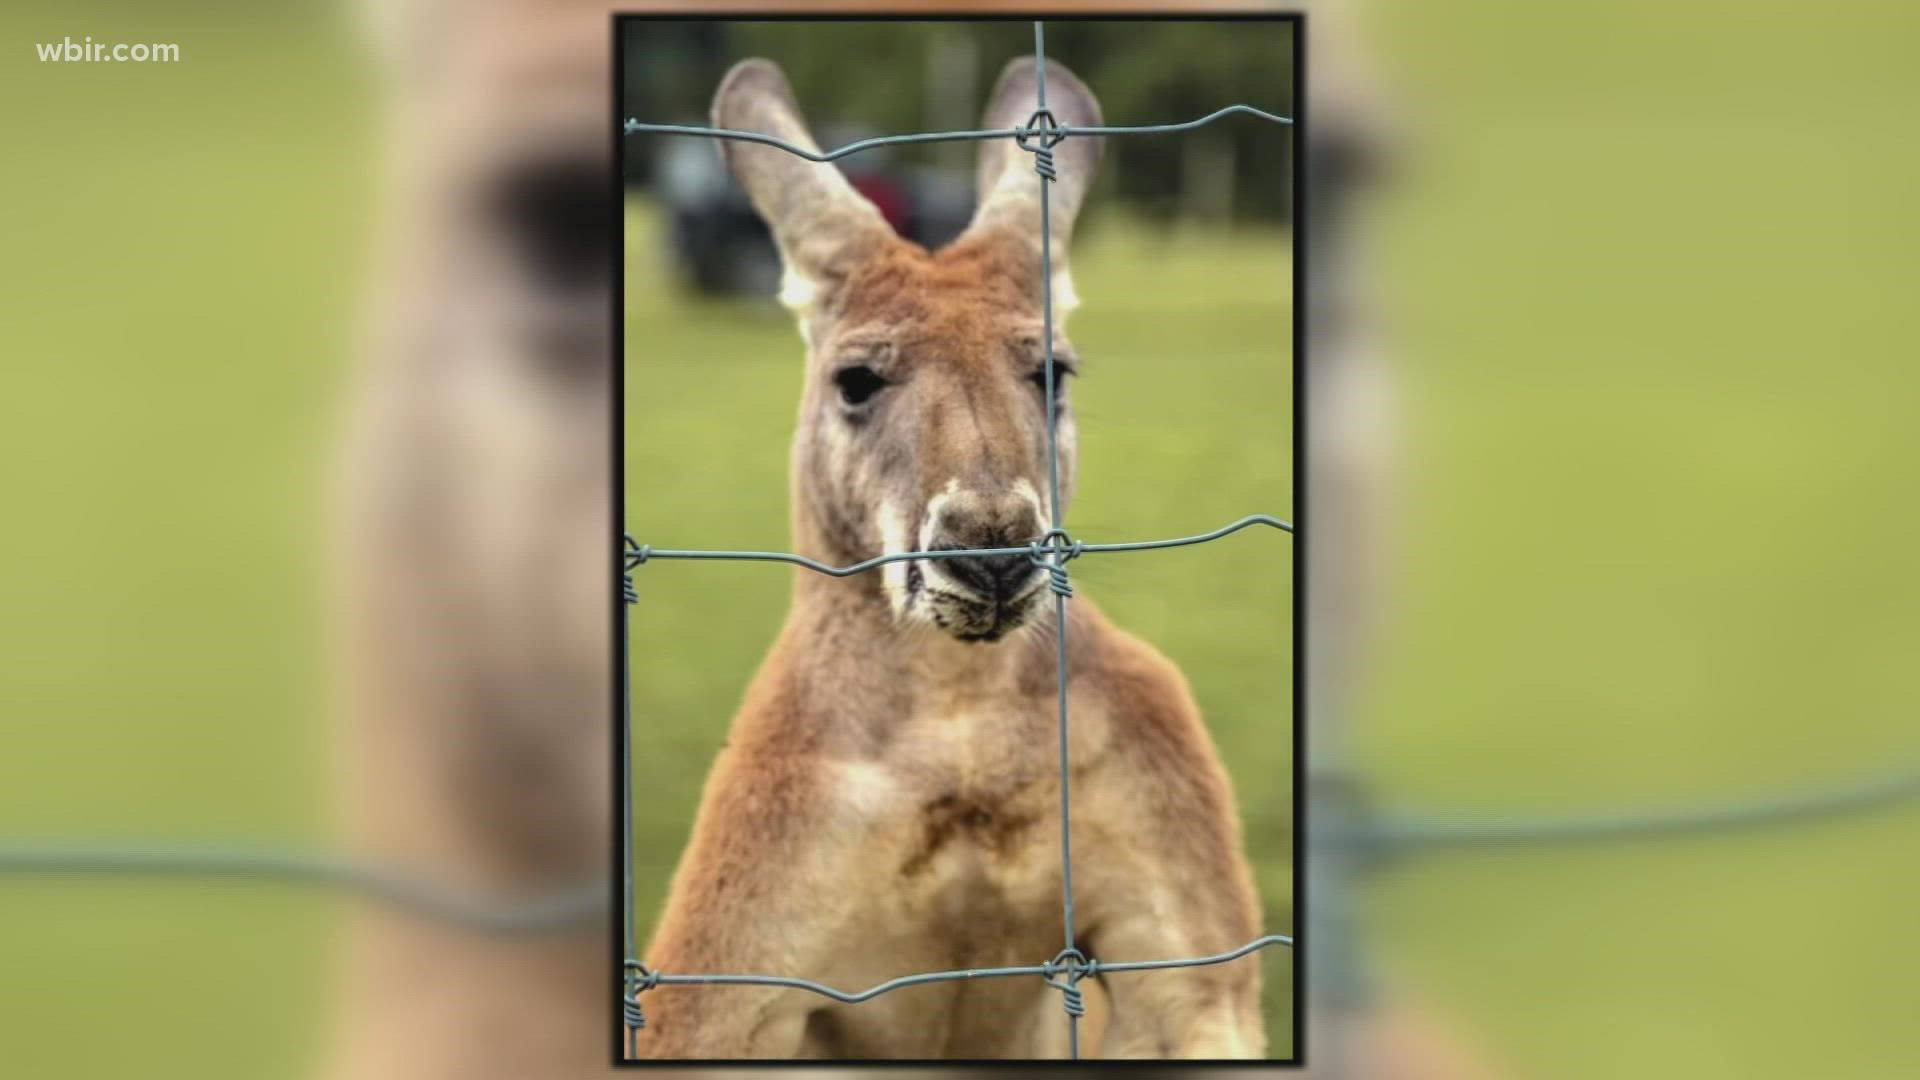 A man in Middle Tennessee said that his pet kangaroo did not need to die after a neighbor strangled it.